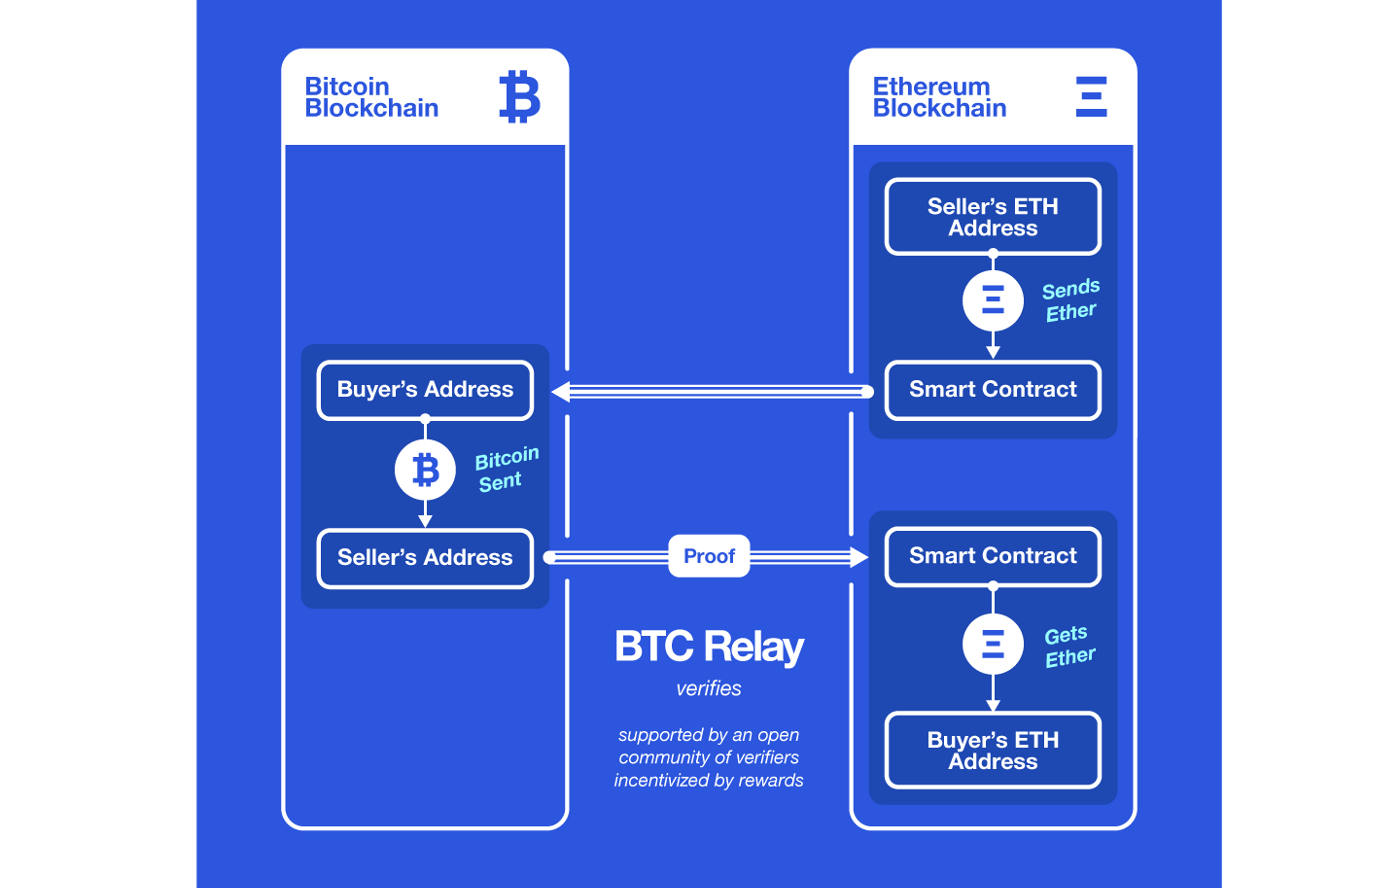 Swapping BTC and ETH with BTC Relay